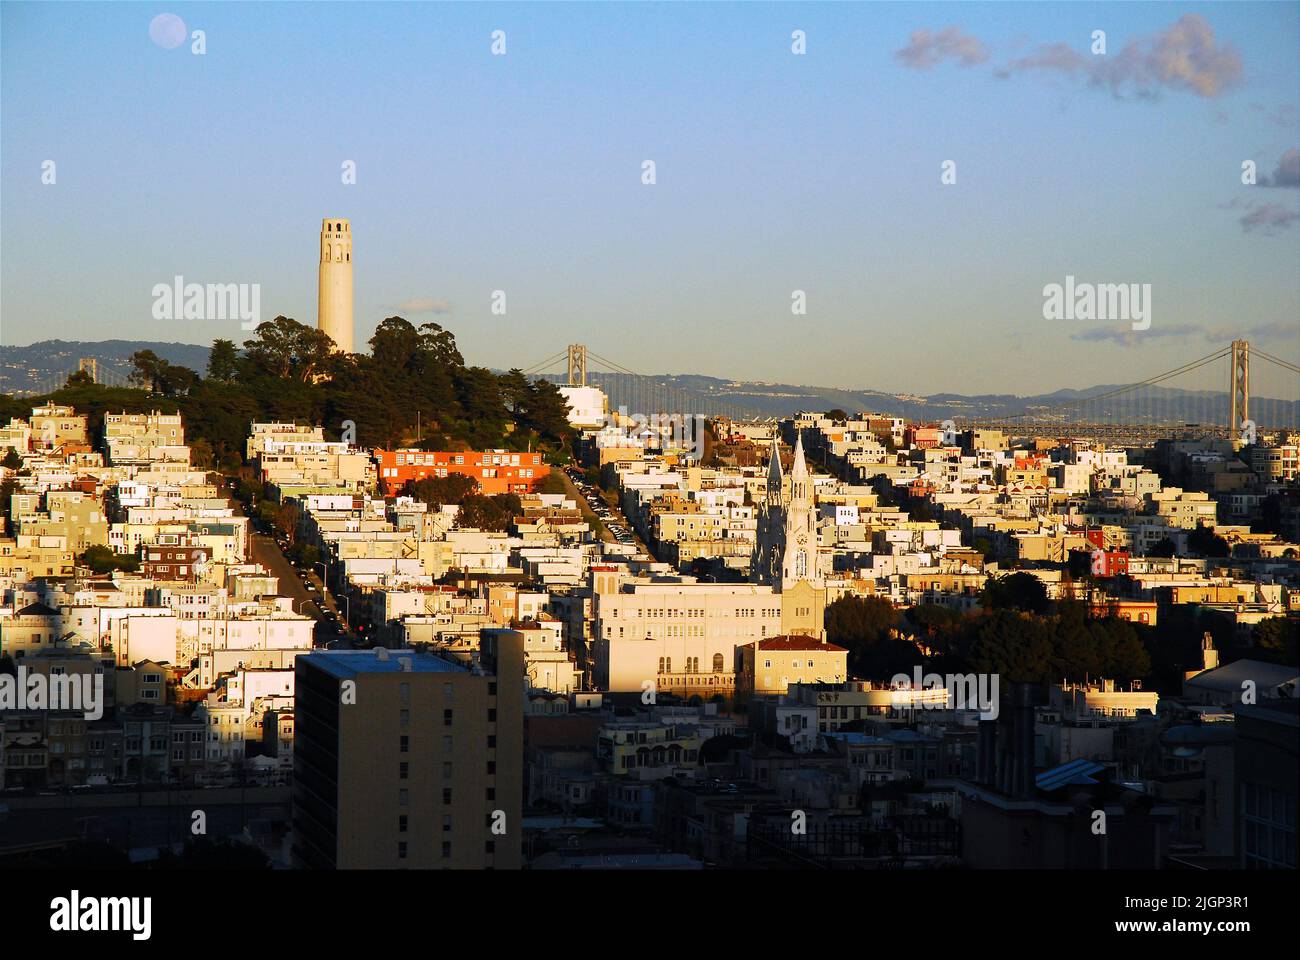 The top of Russian Hill gives a view of the Coit Tower and the neighborhoods and community of San Francisco Stock Photo